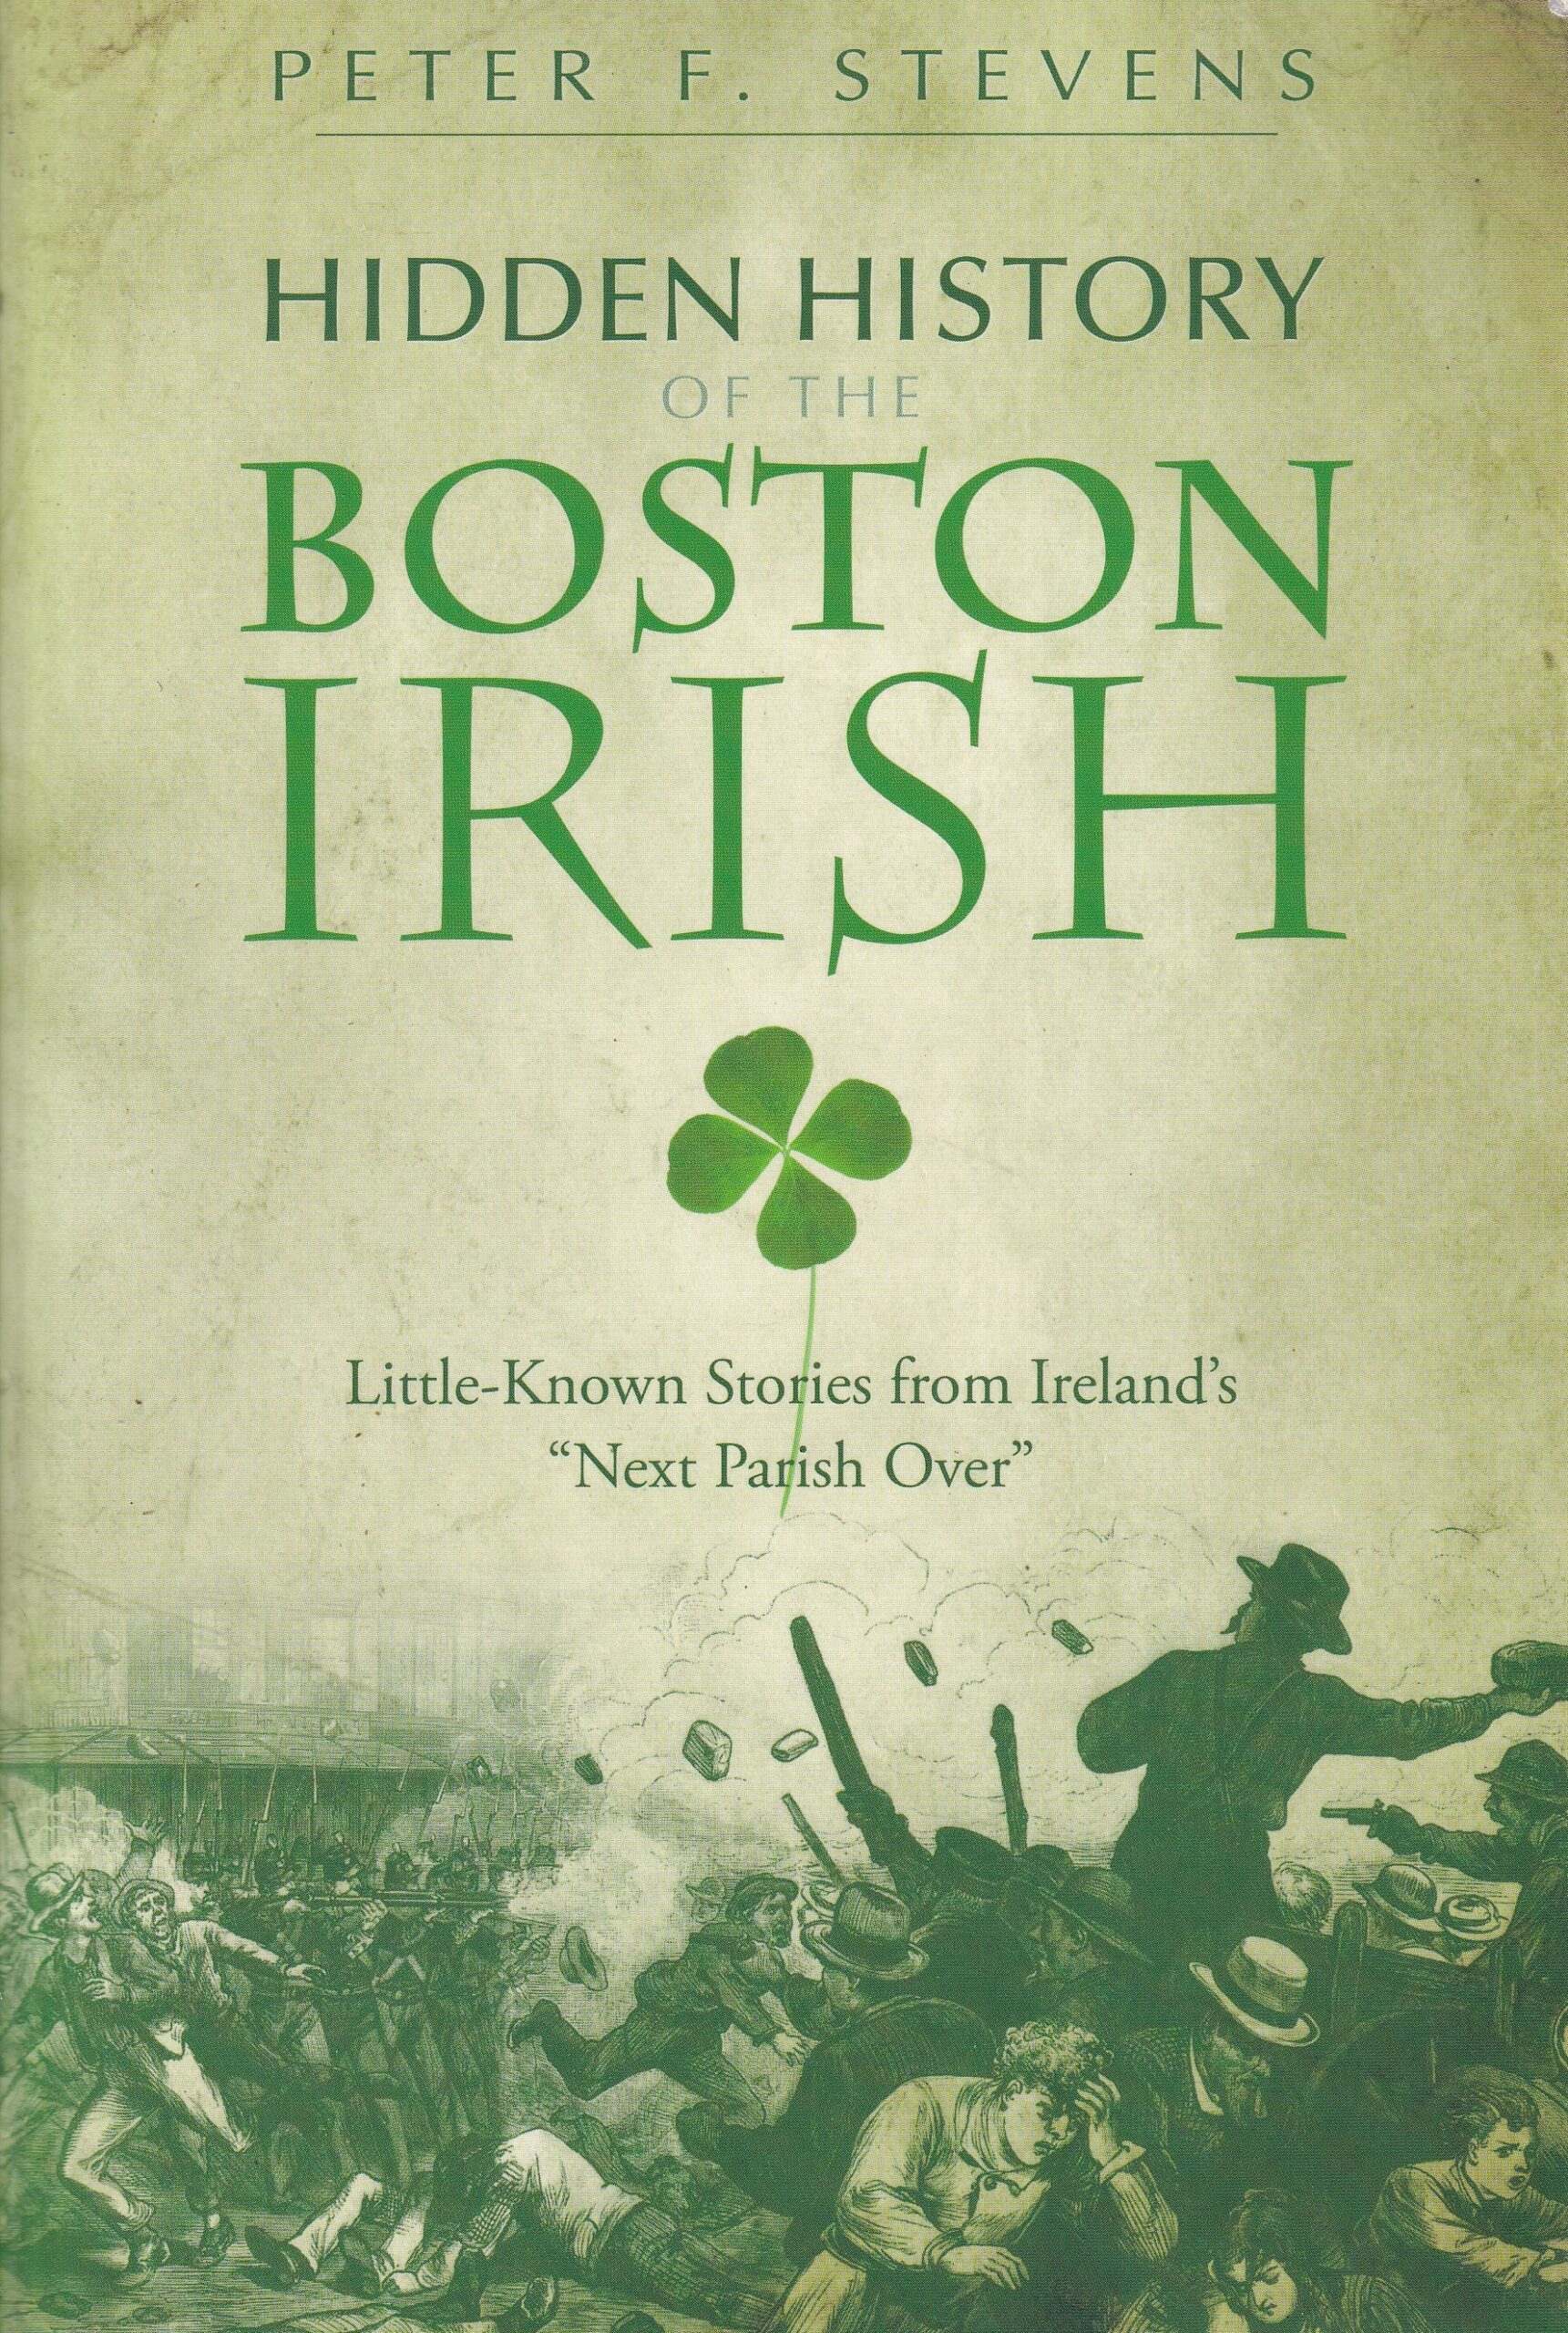 Hidden History of the Boston Irish: Little-Known Stories from Ireland’s “Next Parish Over” by Peter F. Stevens